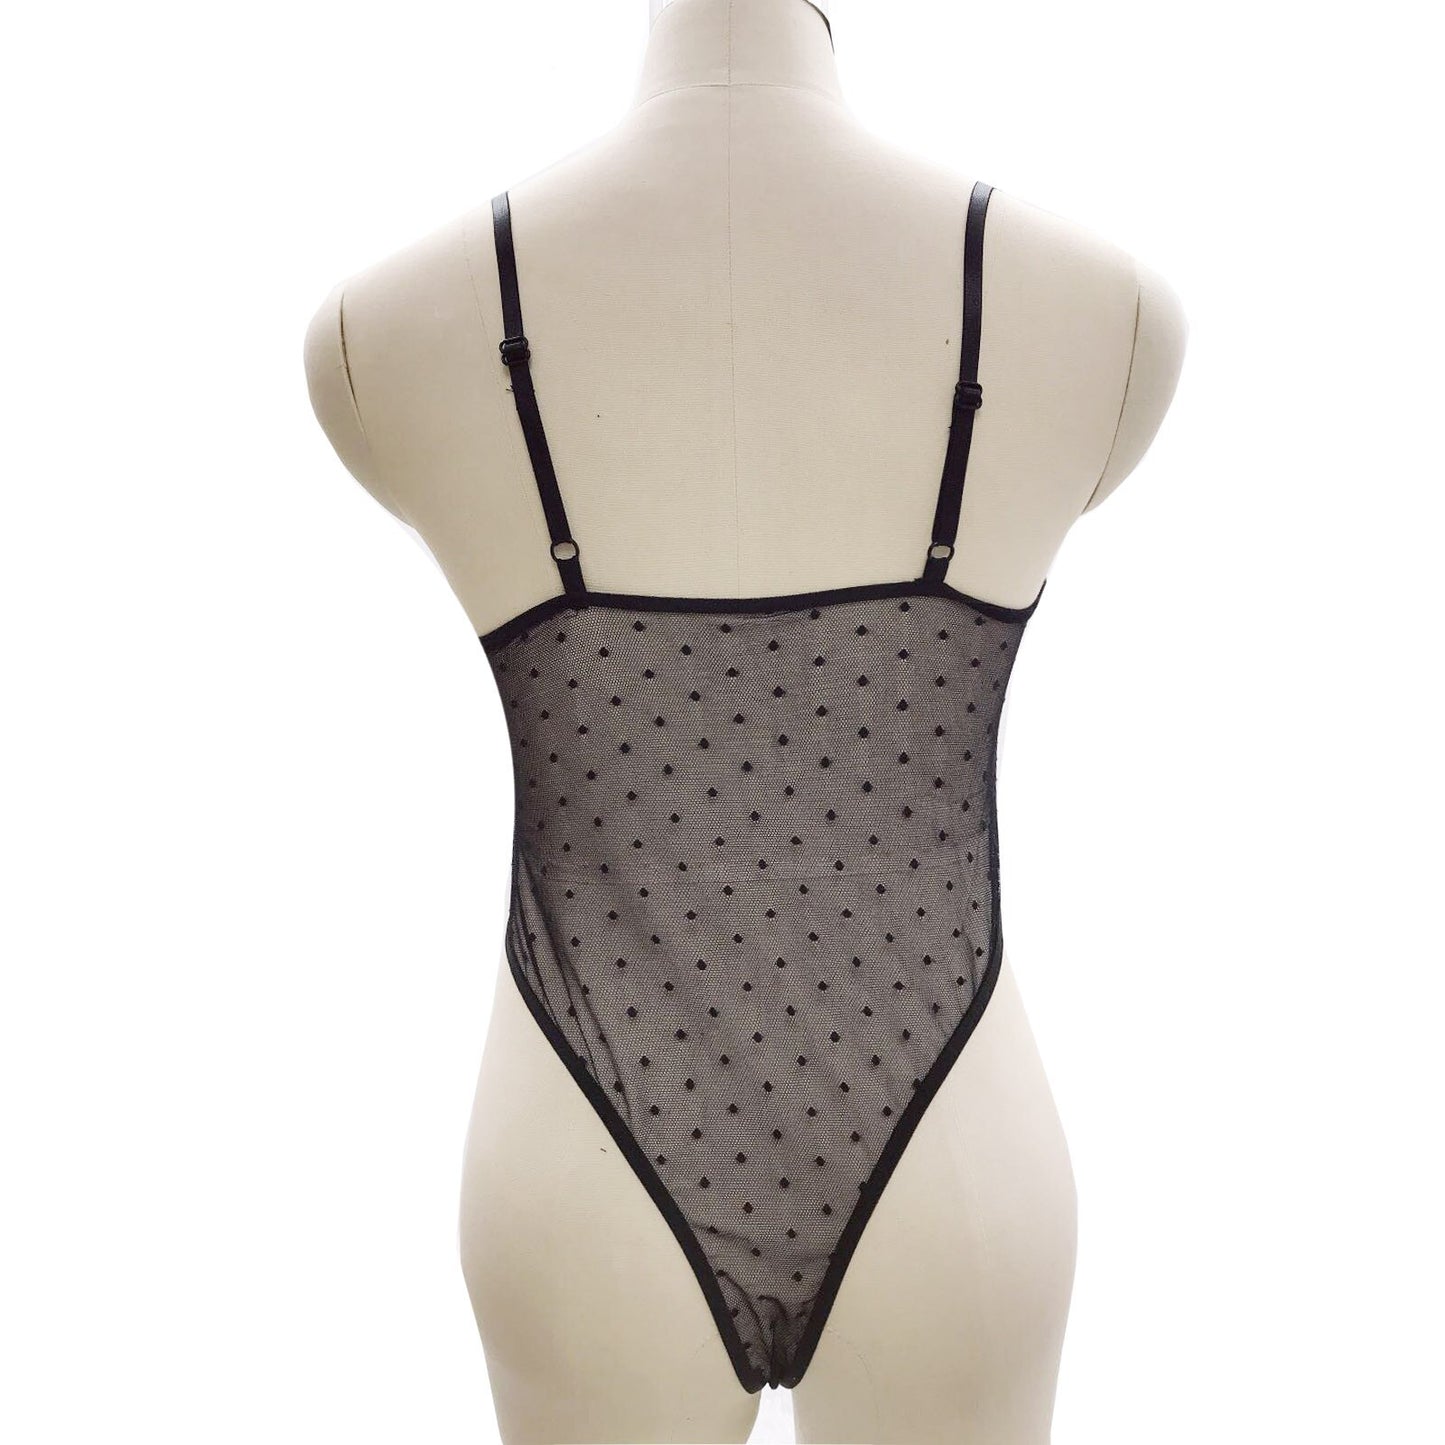 CB Dotted One-Piece Underwear freeshipping - Cassy's Boutique